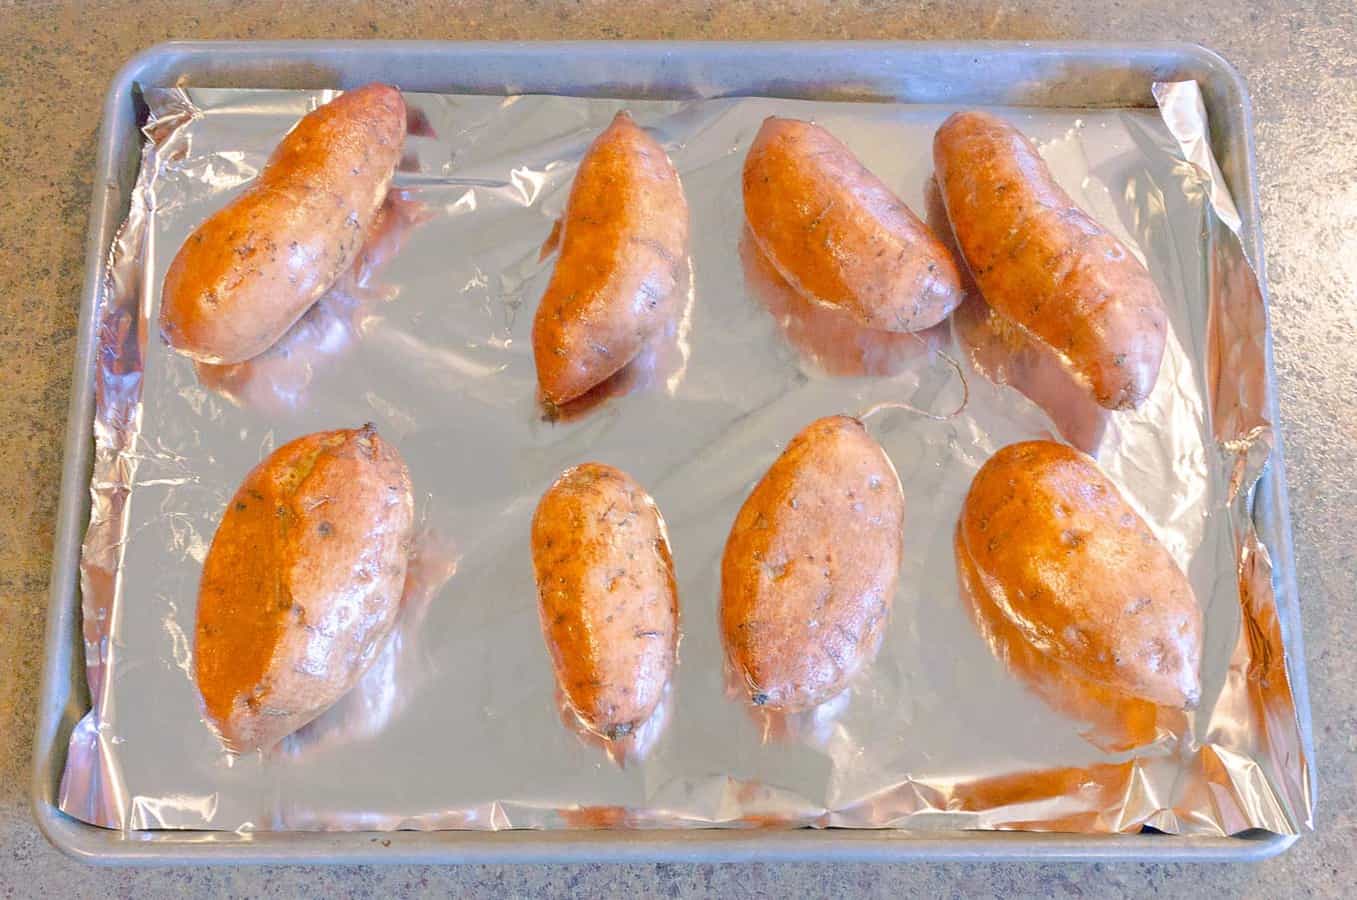 baked sweet potatoes on a foil lined pan ready to be bakes